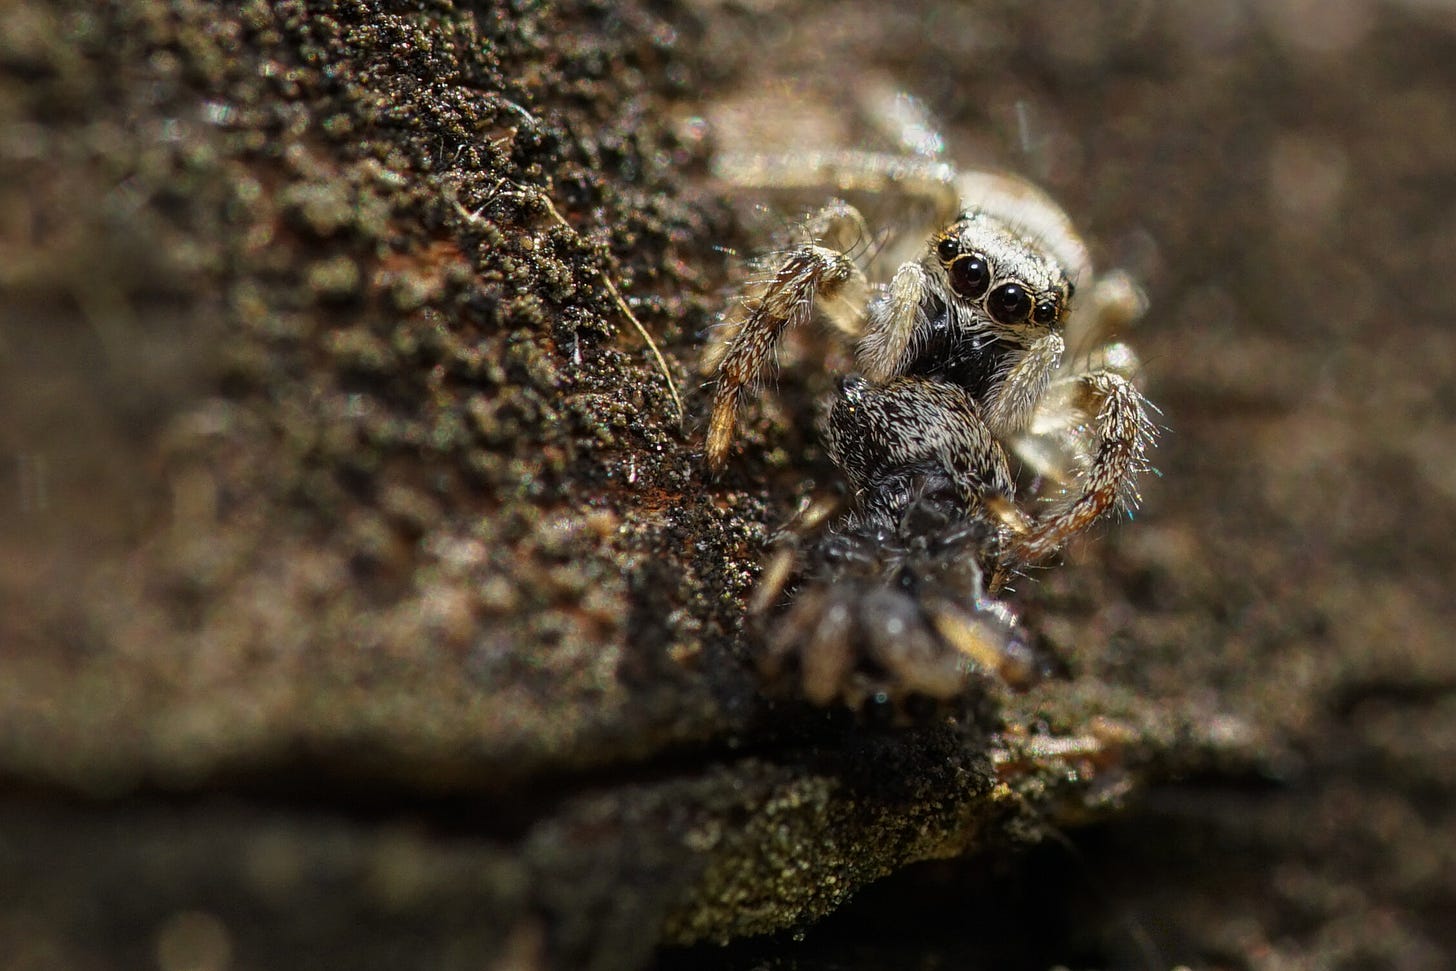 A jumping spider eating what appears to be another jumping spider, but in a cute way